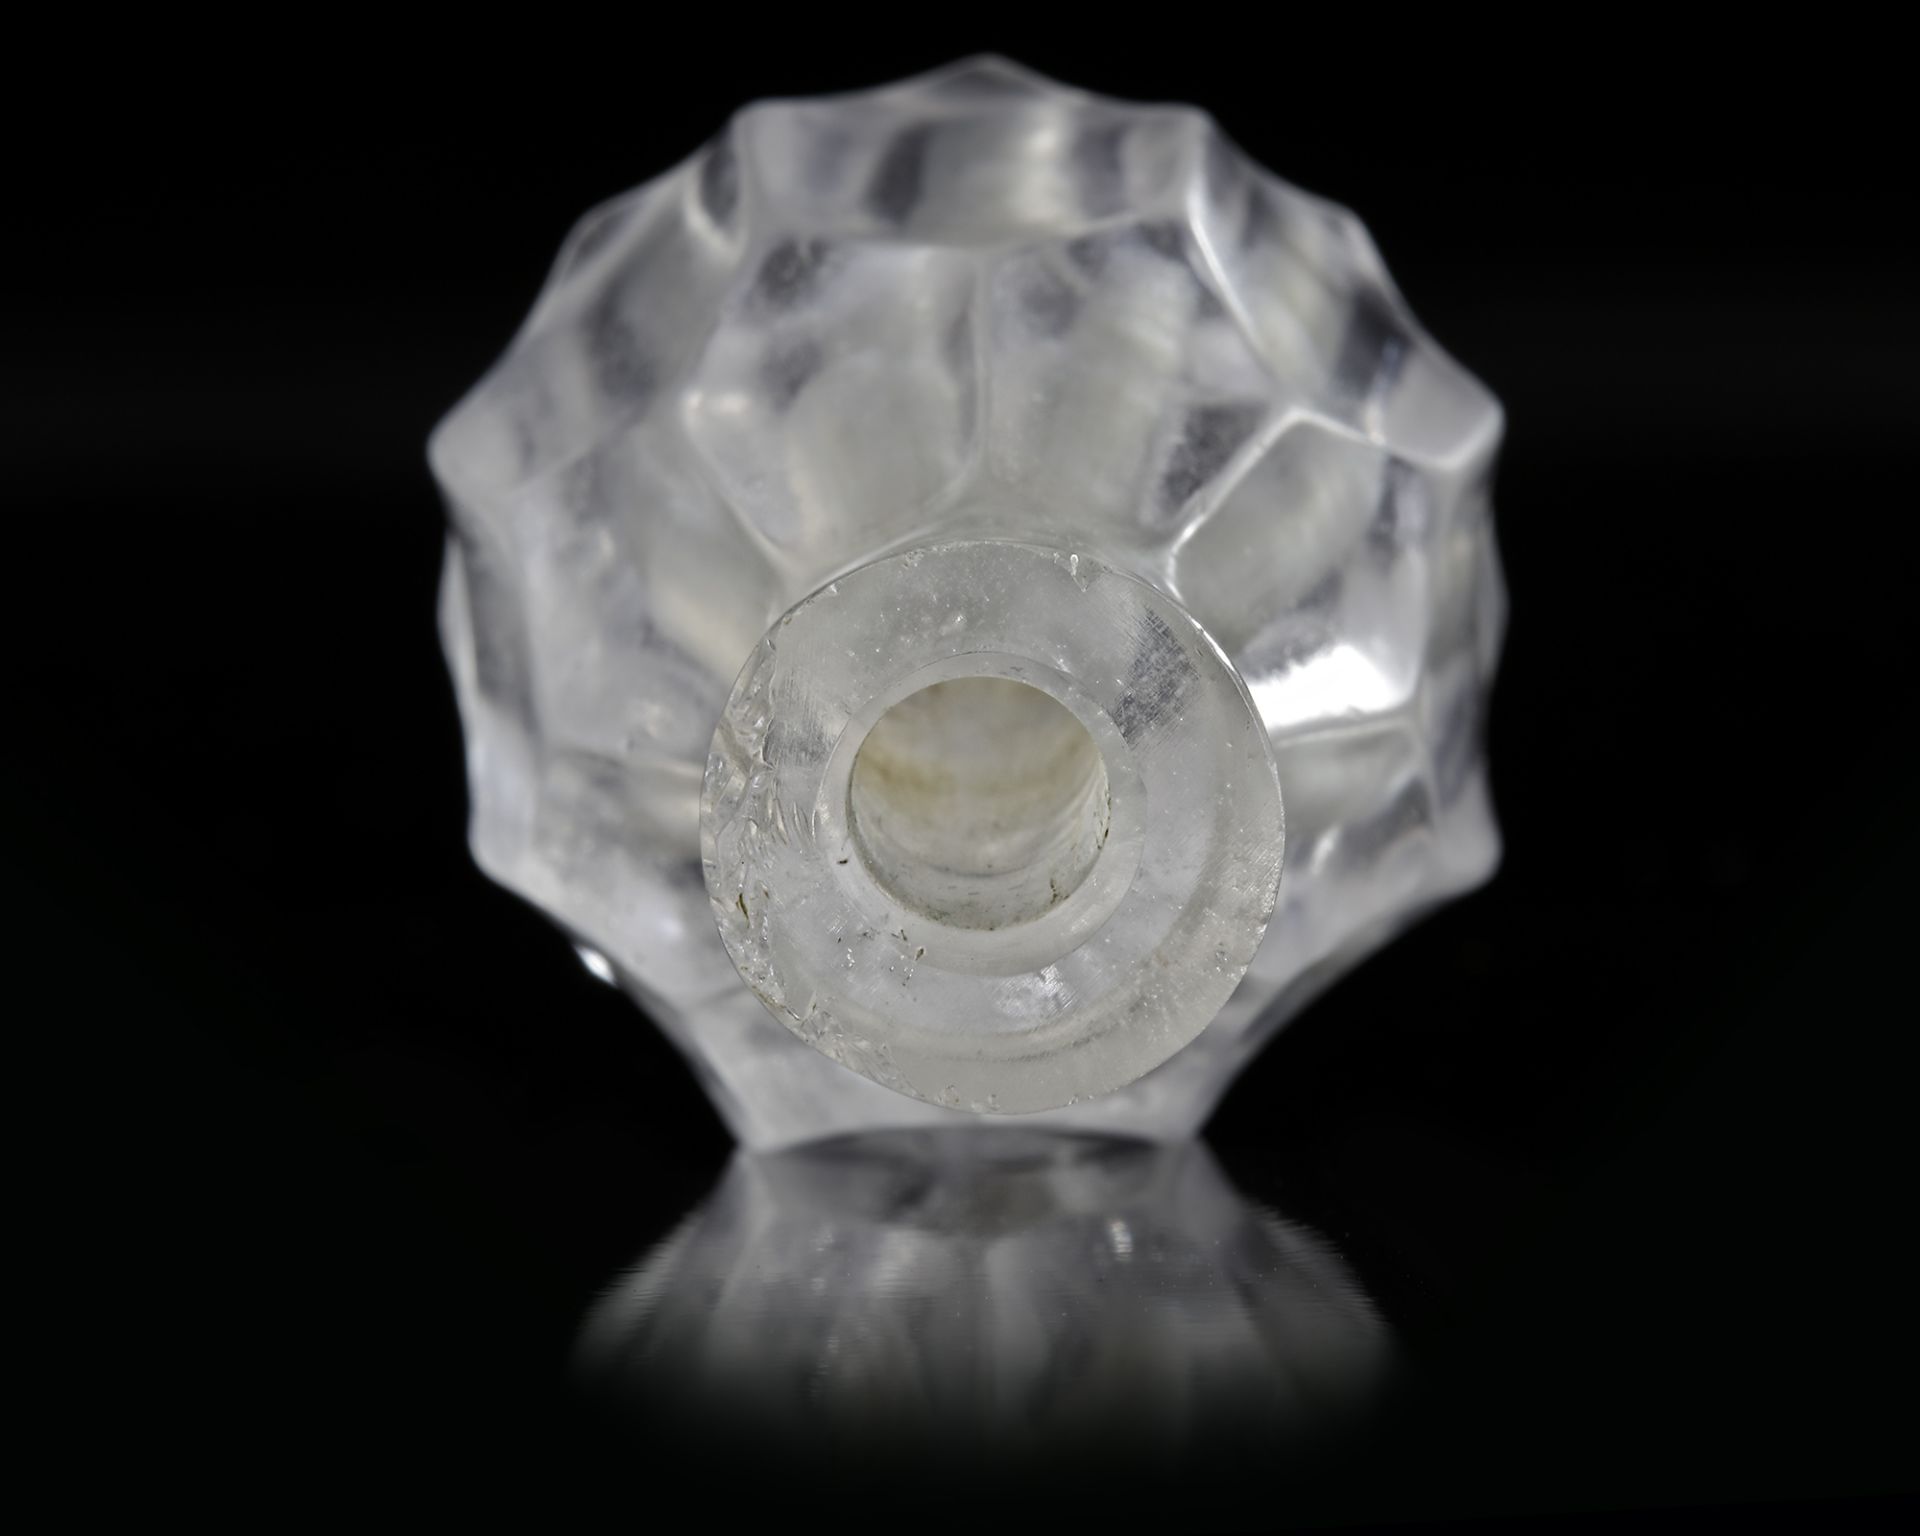 A FATIMID ROCK CRYSTAL PERFUME FLASK, EGYPT, 10TH-12TH CENTURY - Image 4 of 5